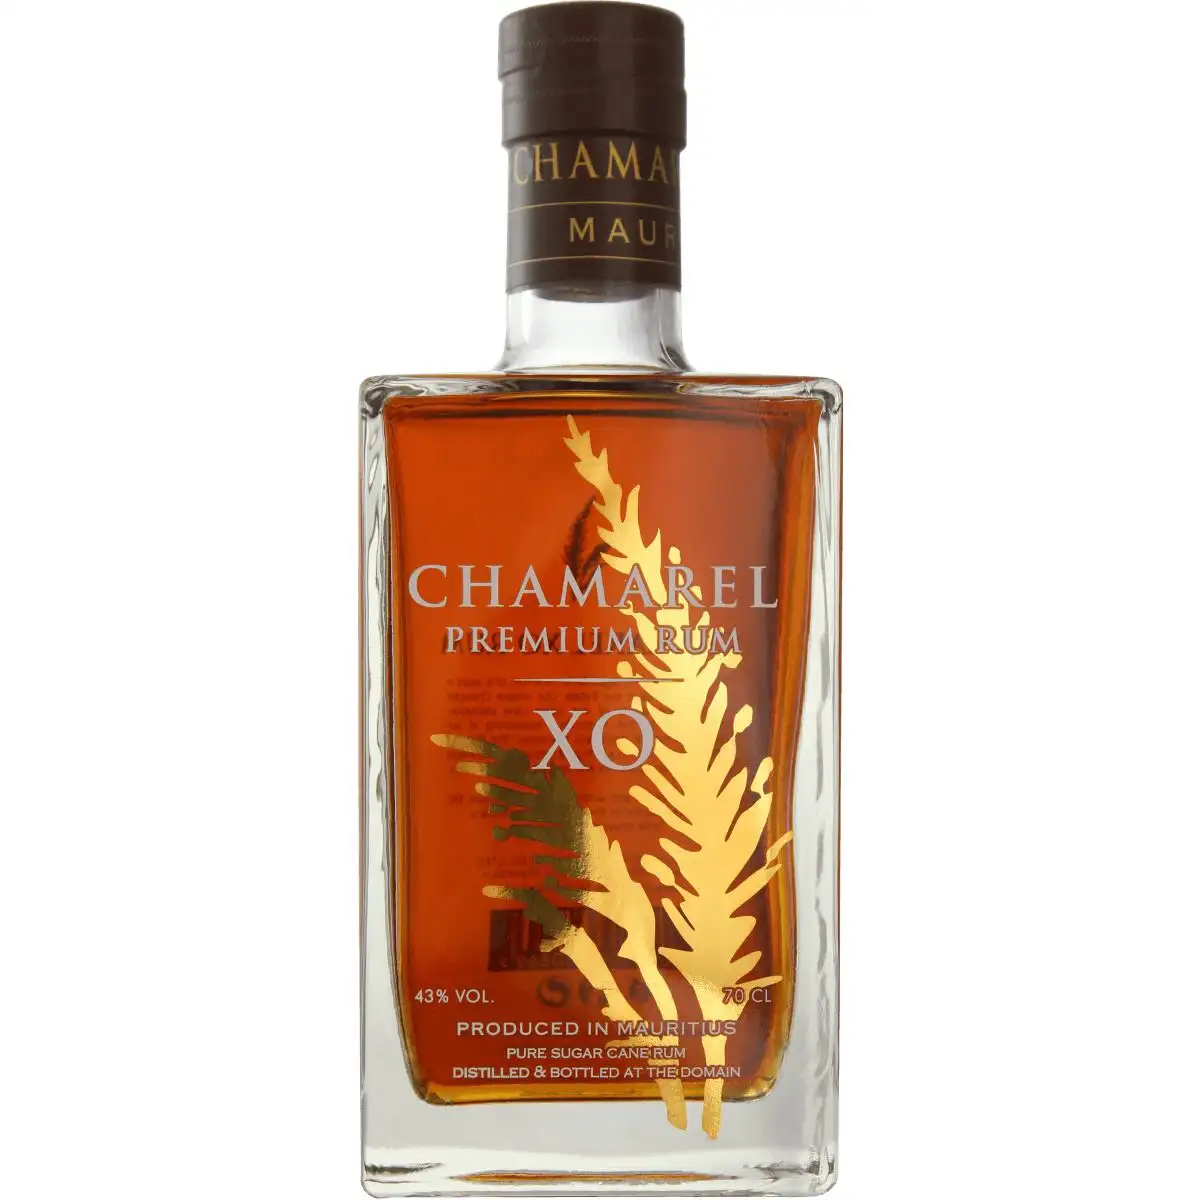 Image of the front of the bottle of the rum XO